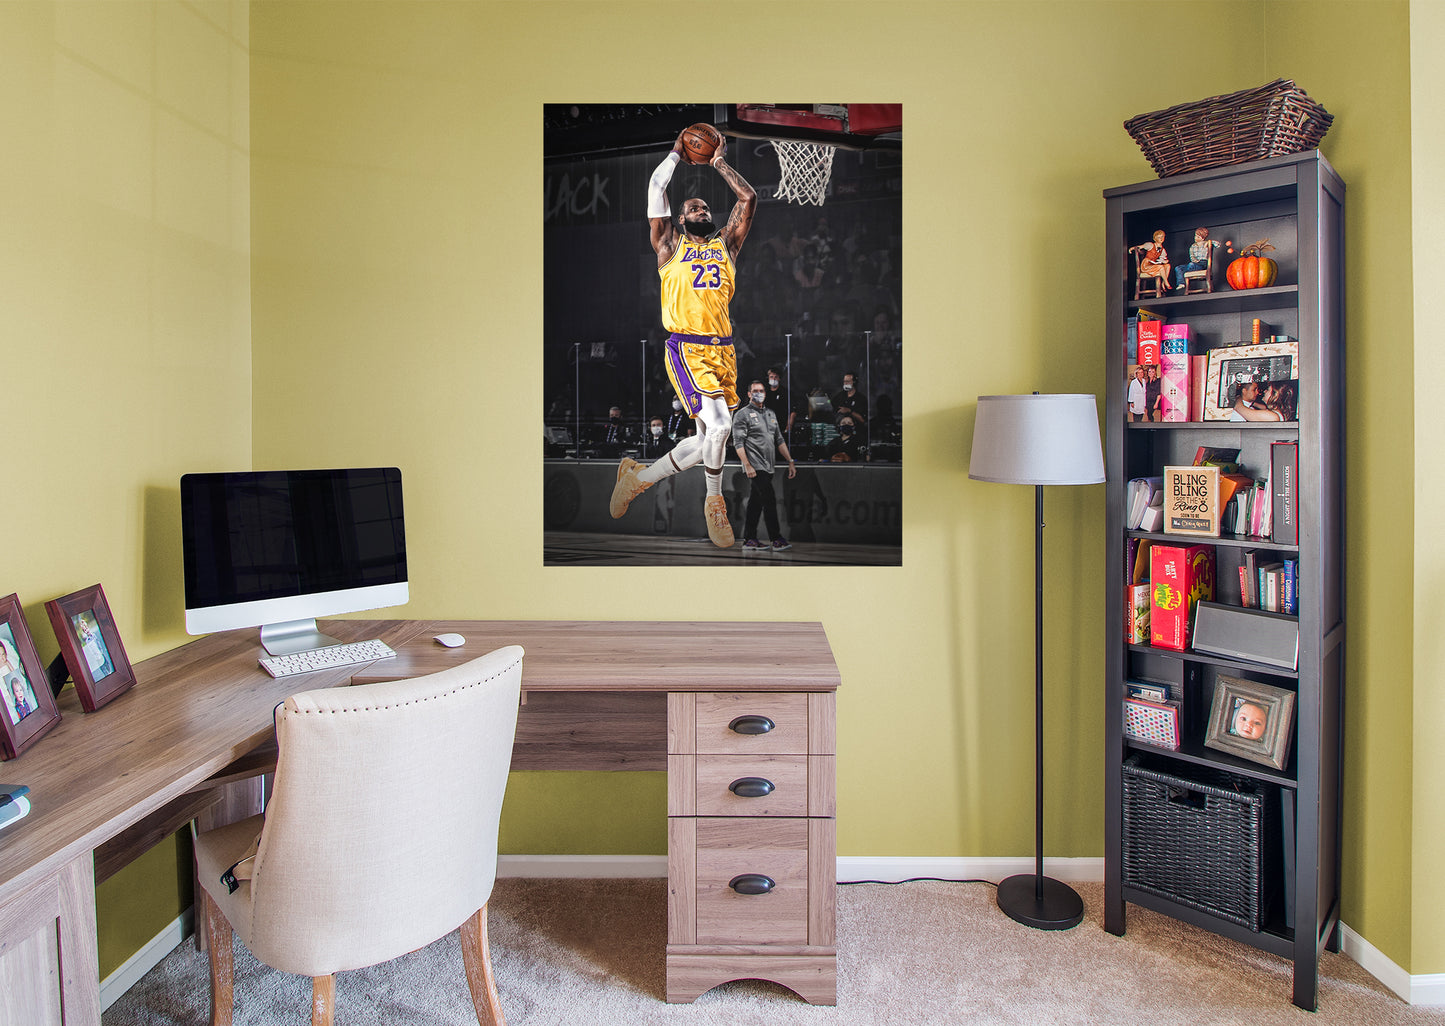 Los Angeles Lakers: LeBron James  Dunk Mural        - Officially Licensed NBA Removable Wall   Adhesive Decal